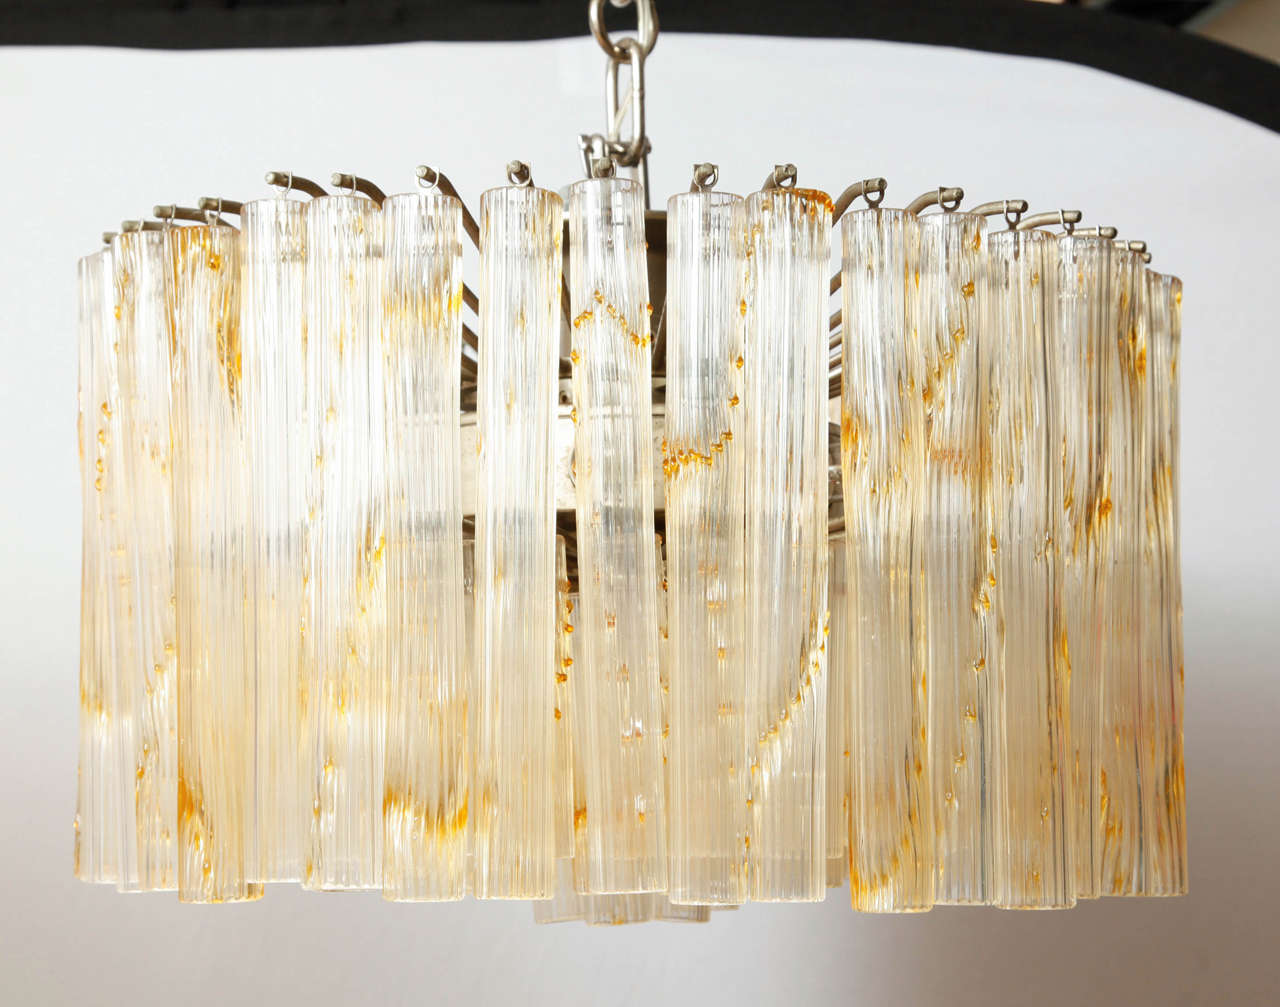 'Fiorito' glass chandelier and/or ceiling light executed Venini, glassworks in Murano, Italy made of clear ribbed glass tubes with yellow amber 'drops.
Impressed marks on the fixing (see last image).